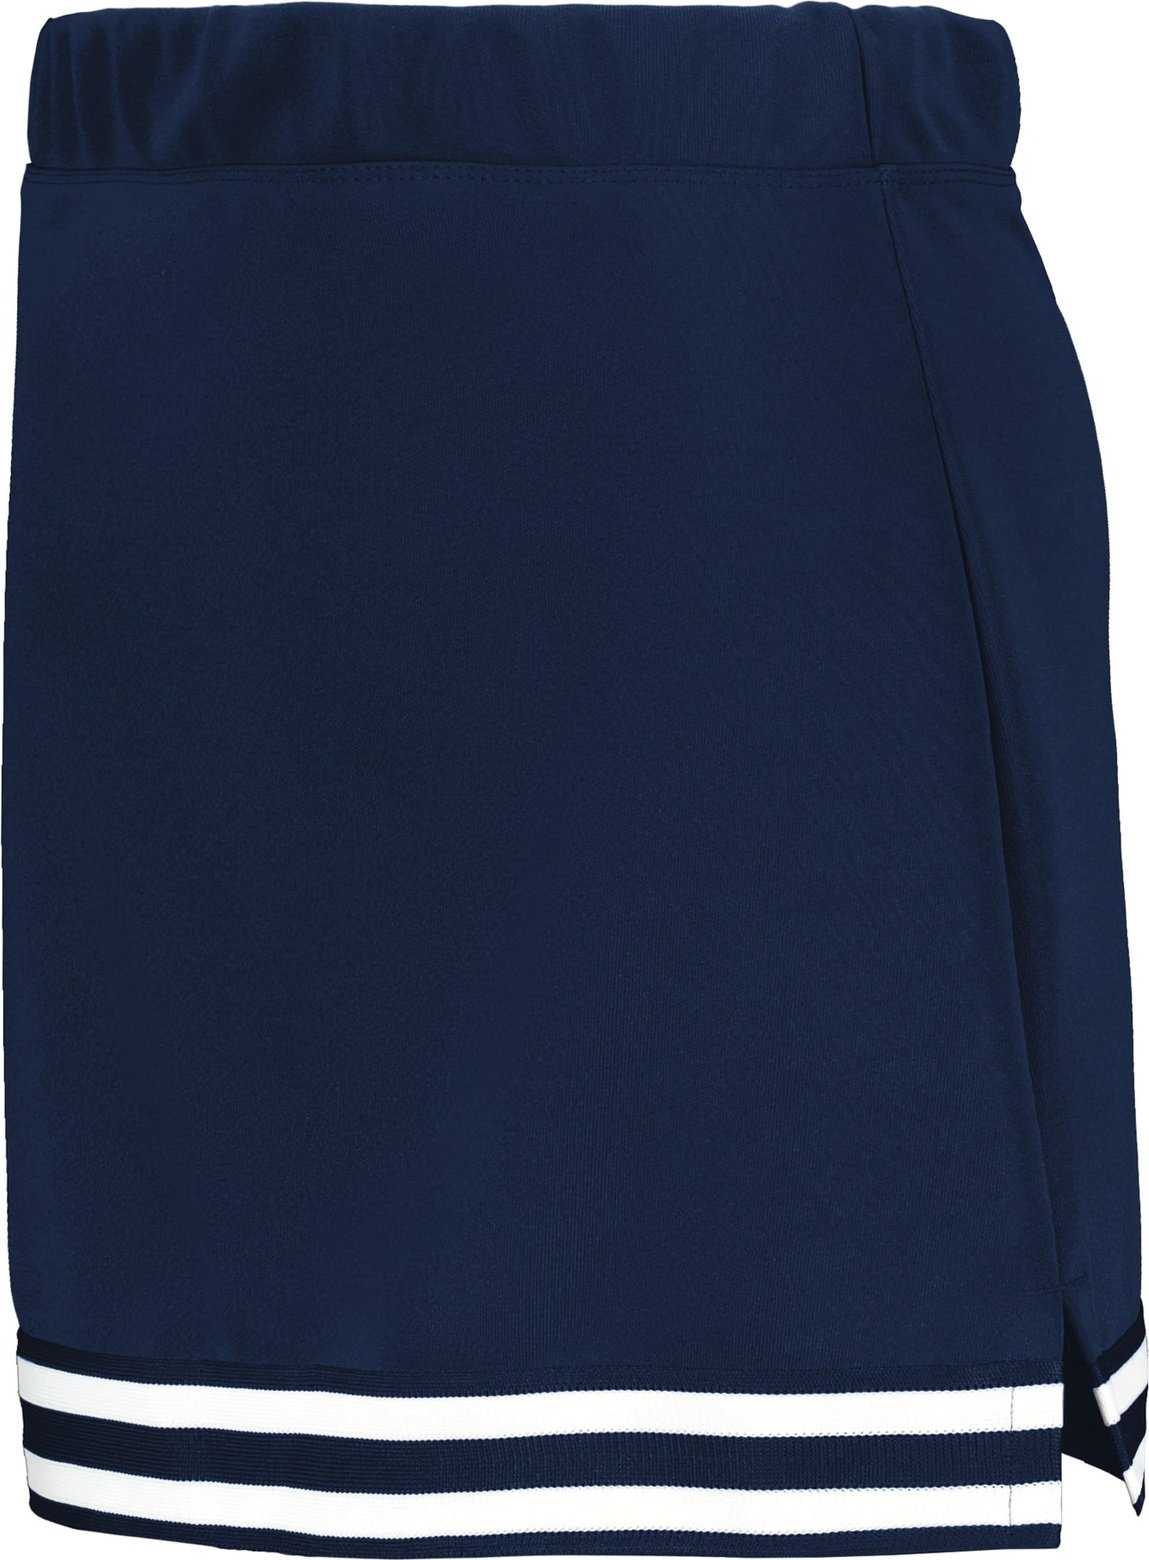 Augusta 6926 Girls Cheer Squad Skirt - Navy Navy White - HIT a Double